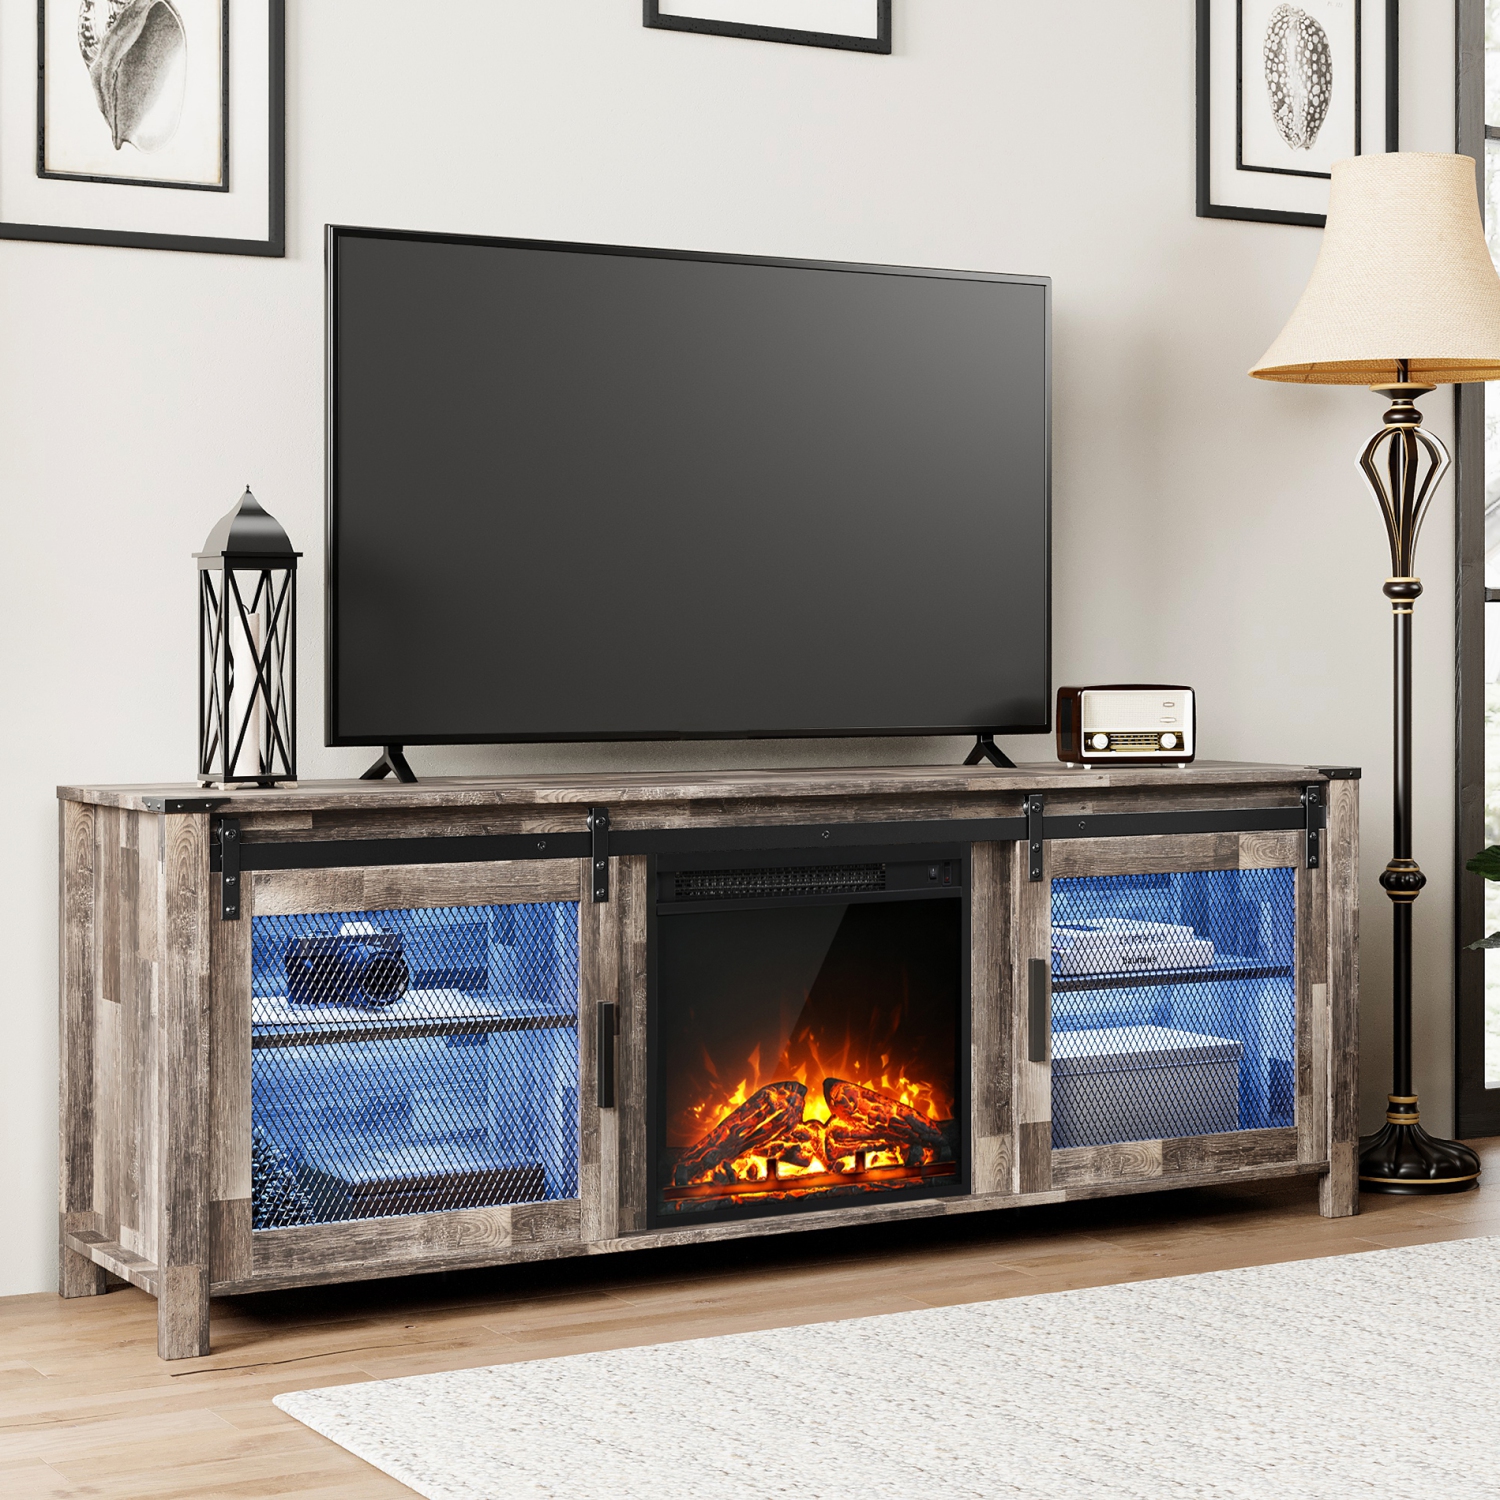 WAMPAT Fireplace TV Stand for 75 Inches TV with Blue LED Lights, Wood Entertainment Center with Sliding Barn Door for Living Room Bedroom,Dark Rustic Oak